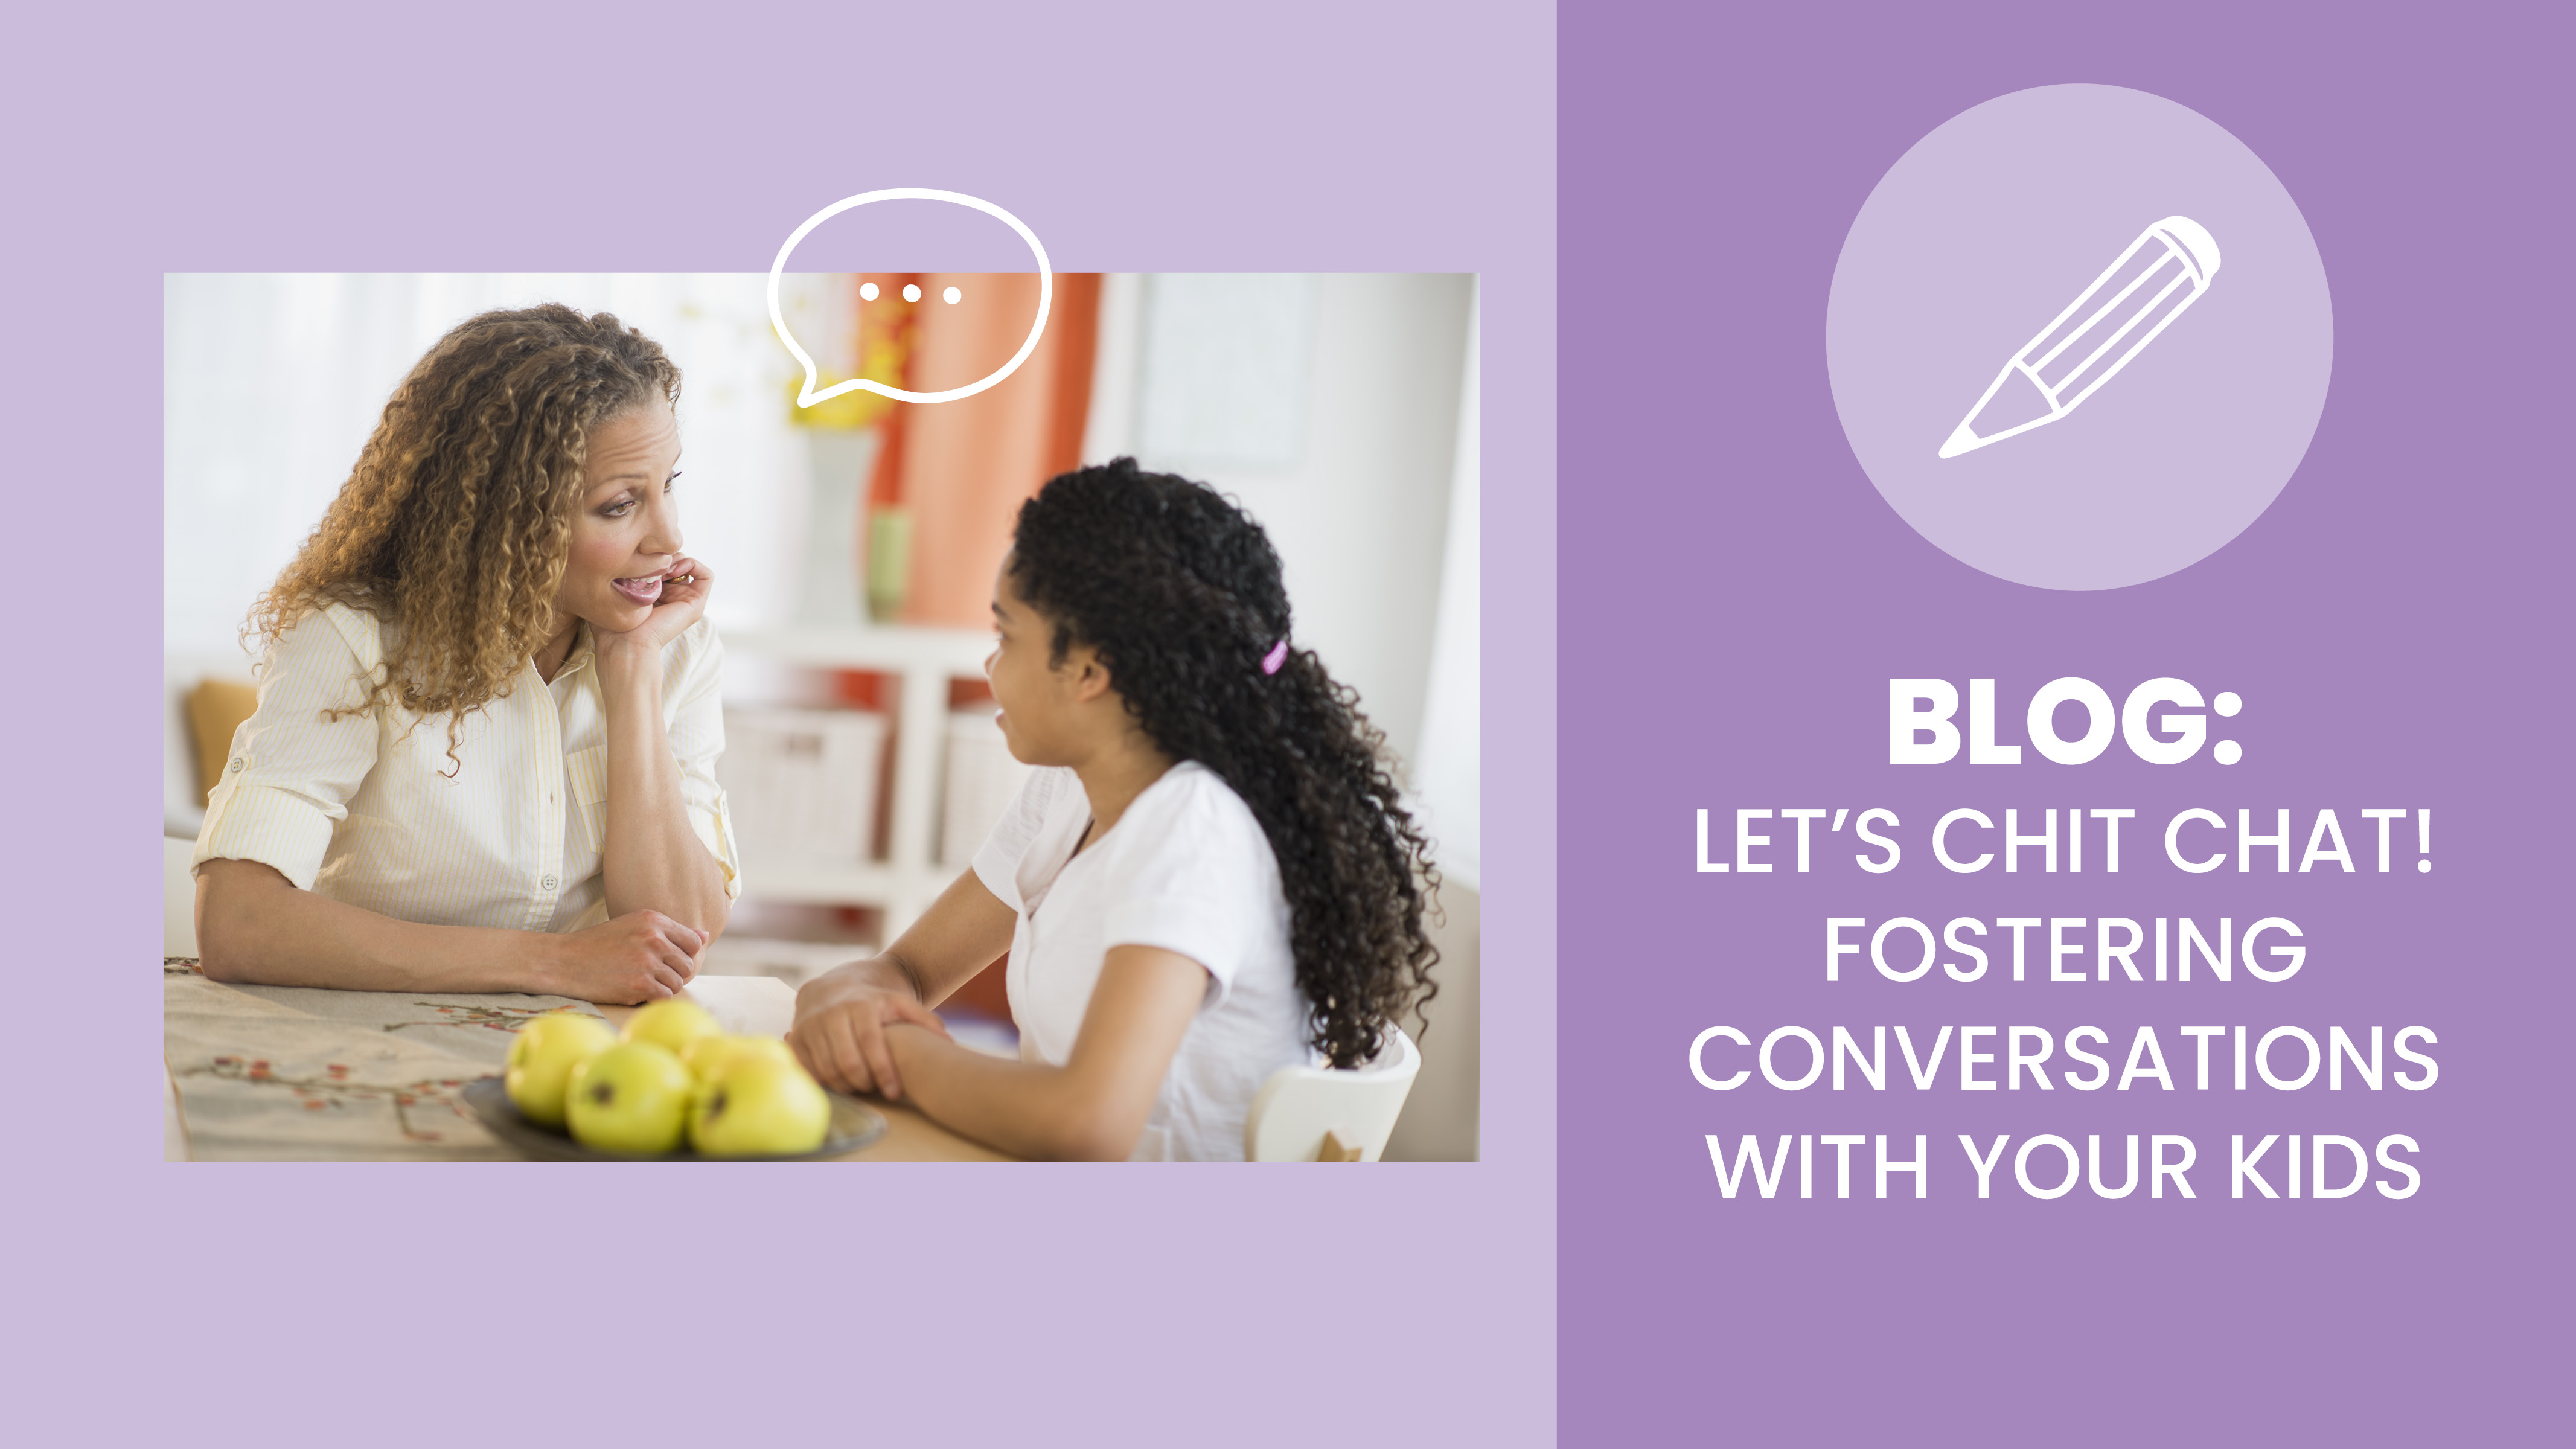 Let's Chit Chat! Fostering Conversations with Your Kids